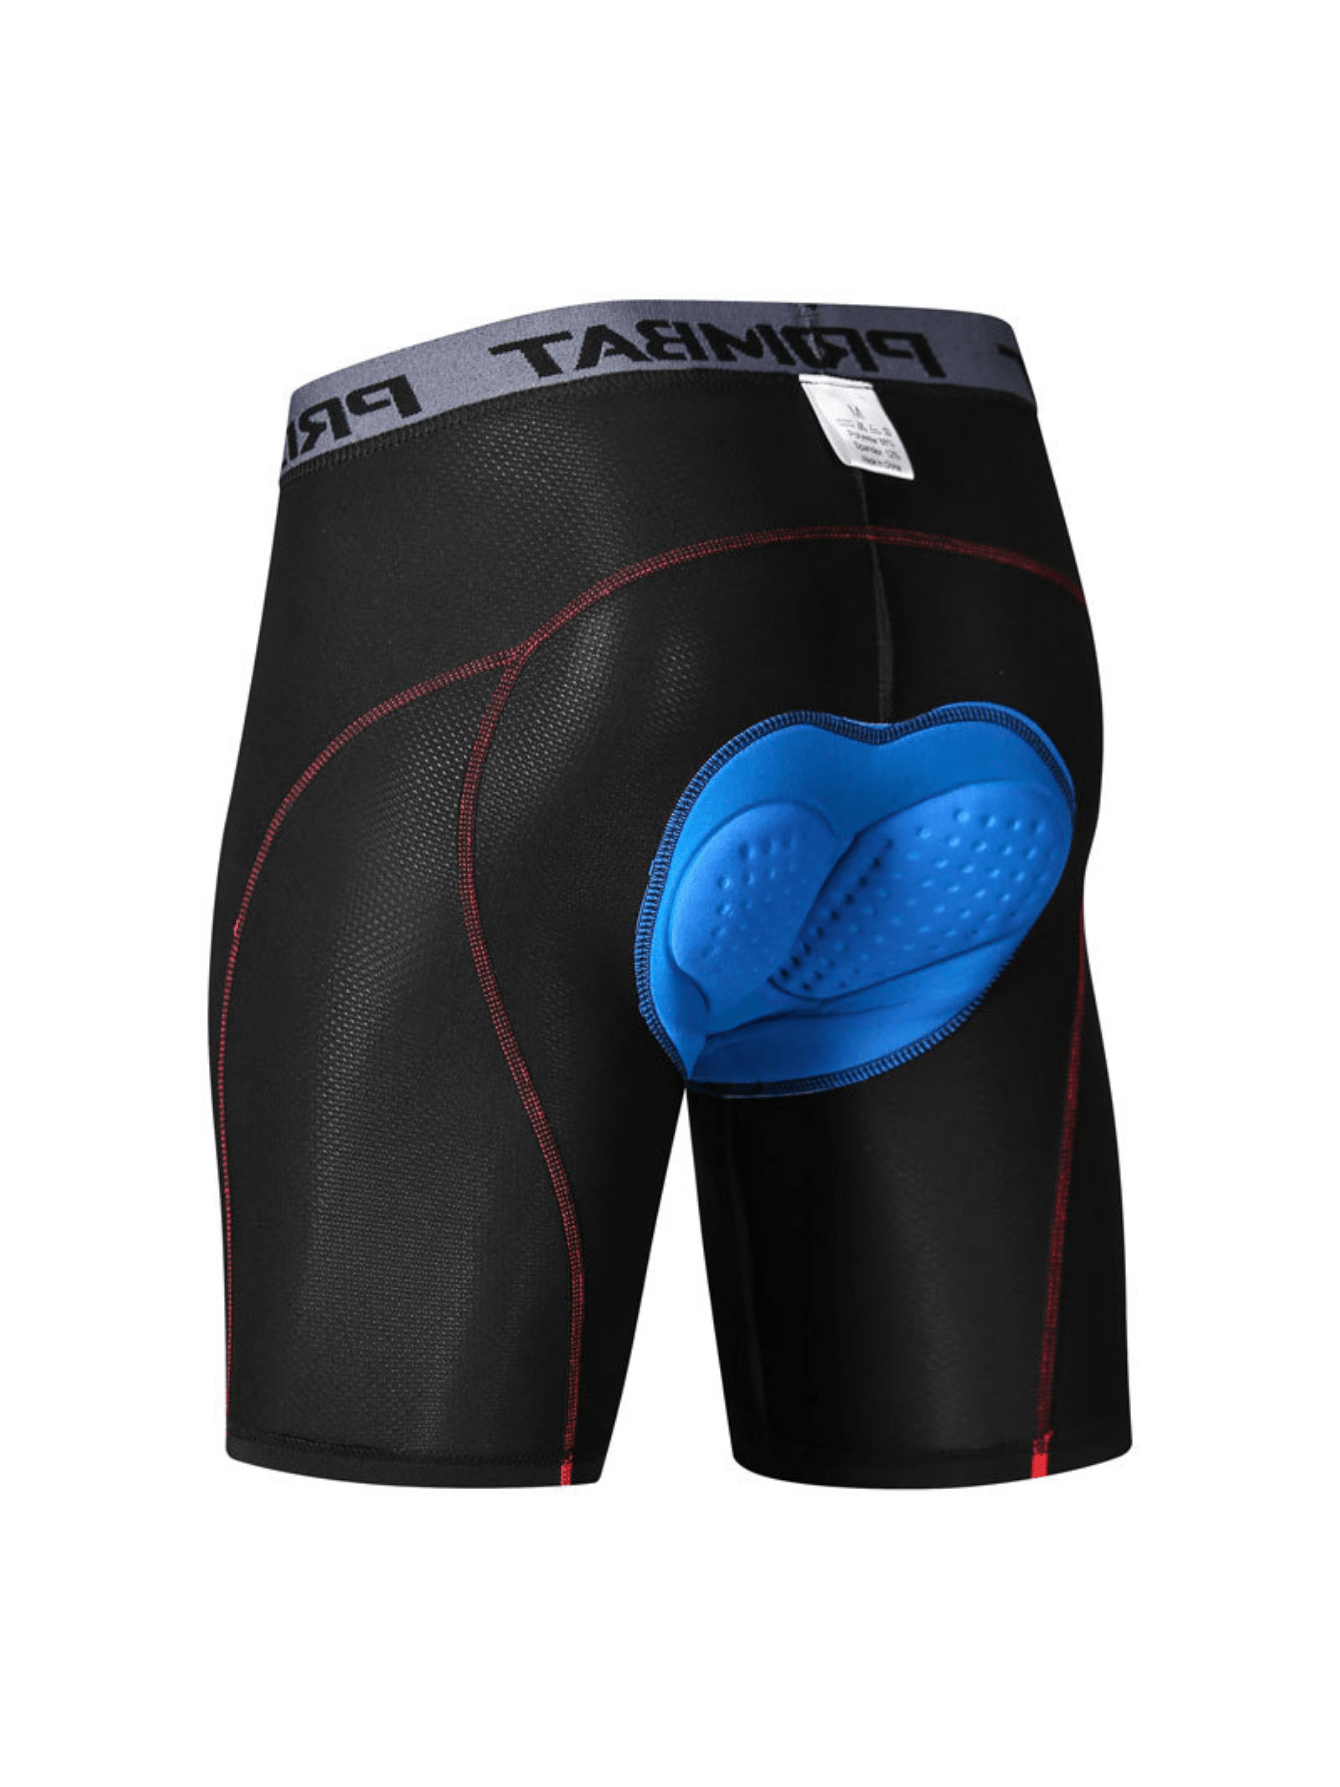 Men Cycling Underwear Shorts Breathable Gel Padded MTB Biking Riding Shorts  – the best products in the Joom Geek online store